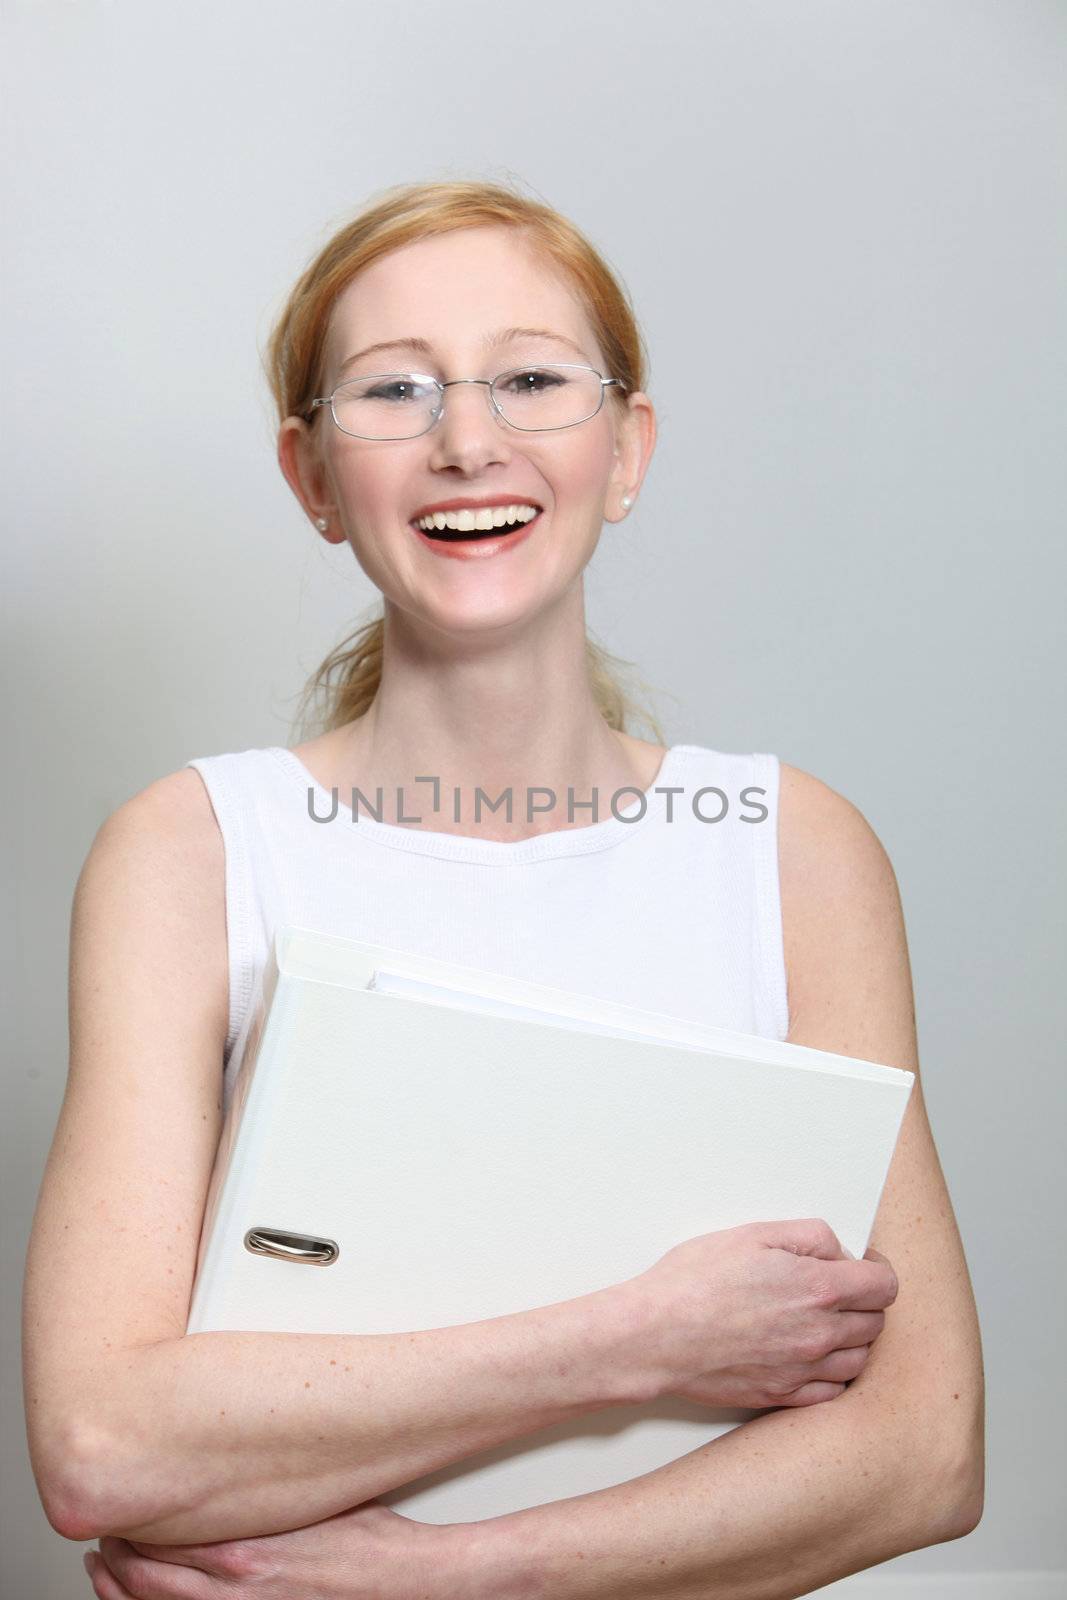 Smiling young woman with glasses and file folder